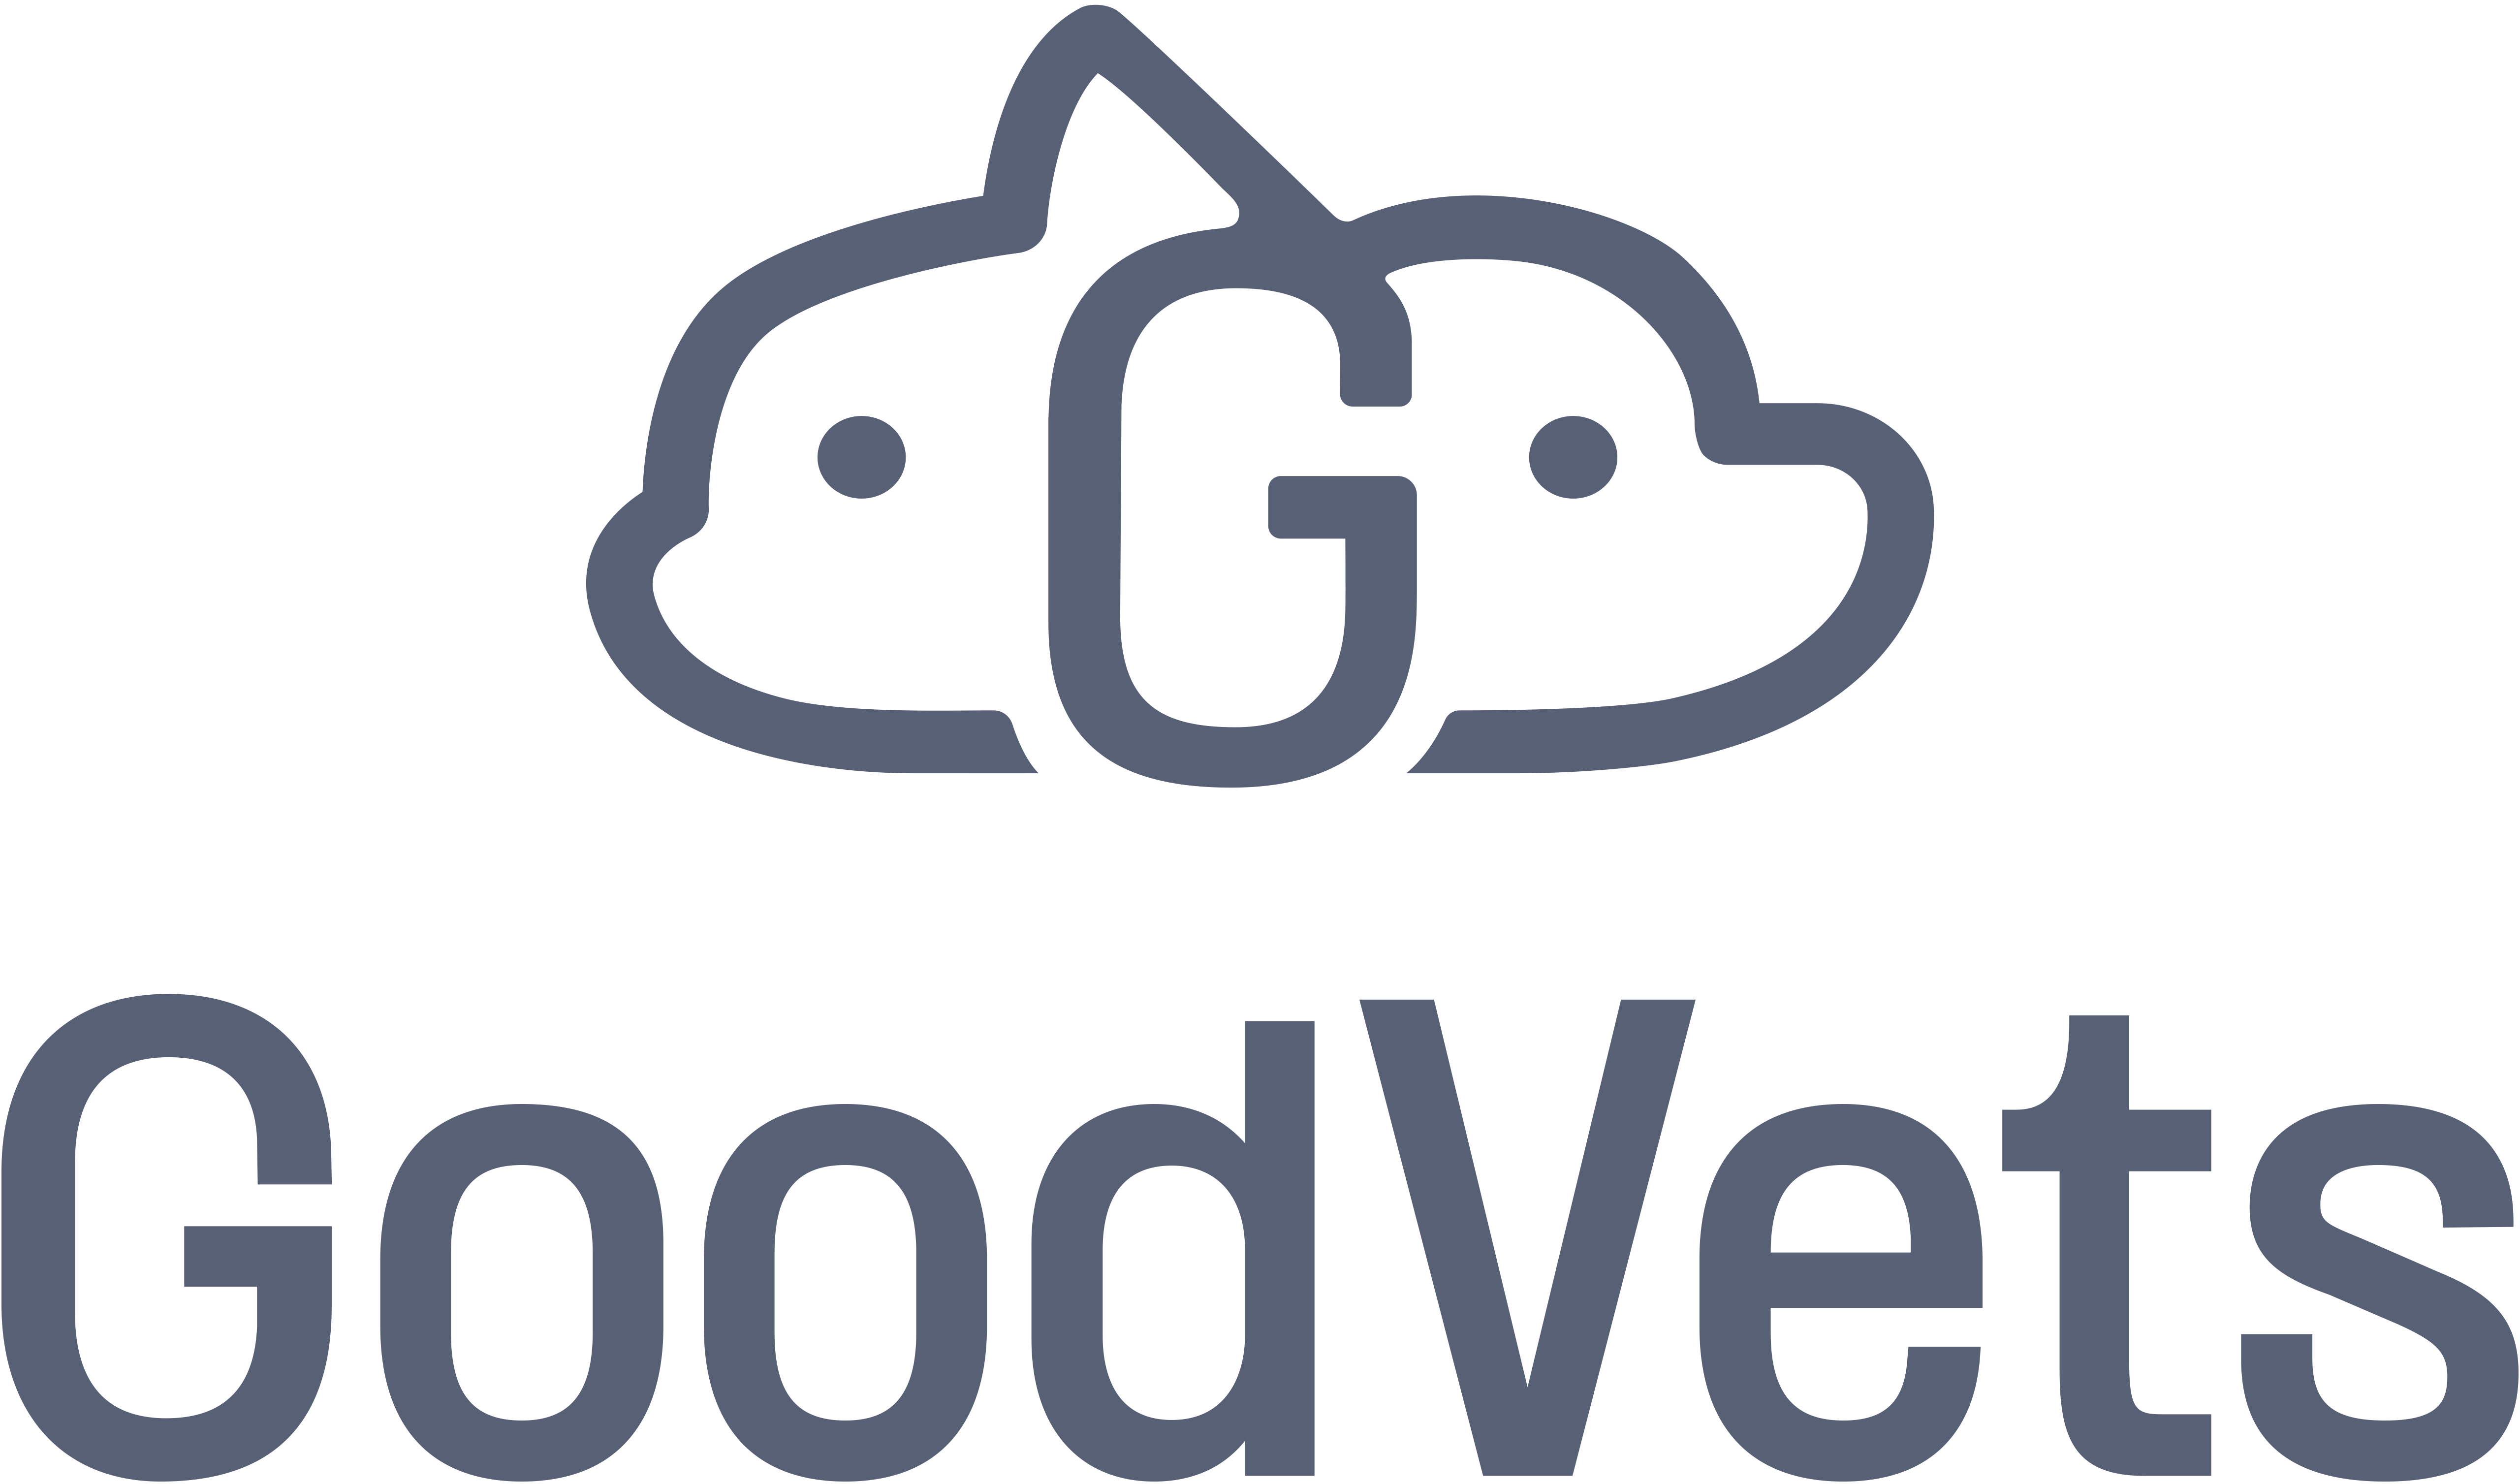 GoodVets_Stacked_deepgray